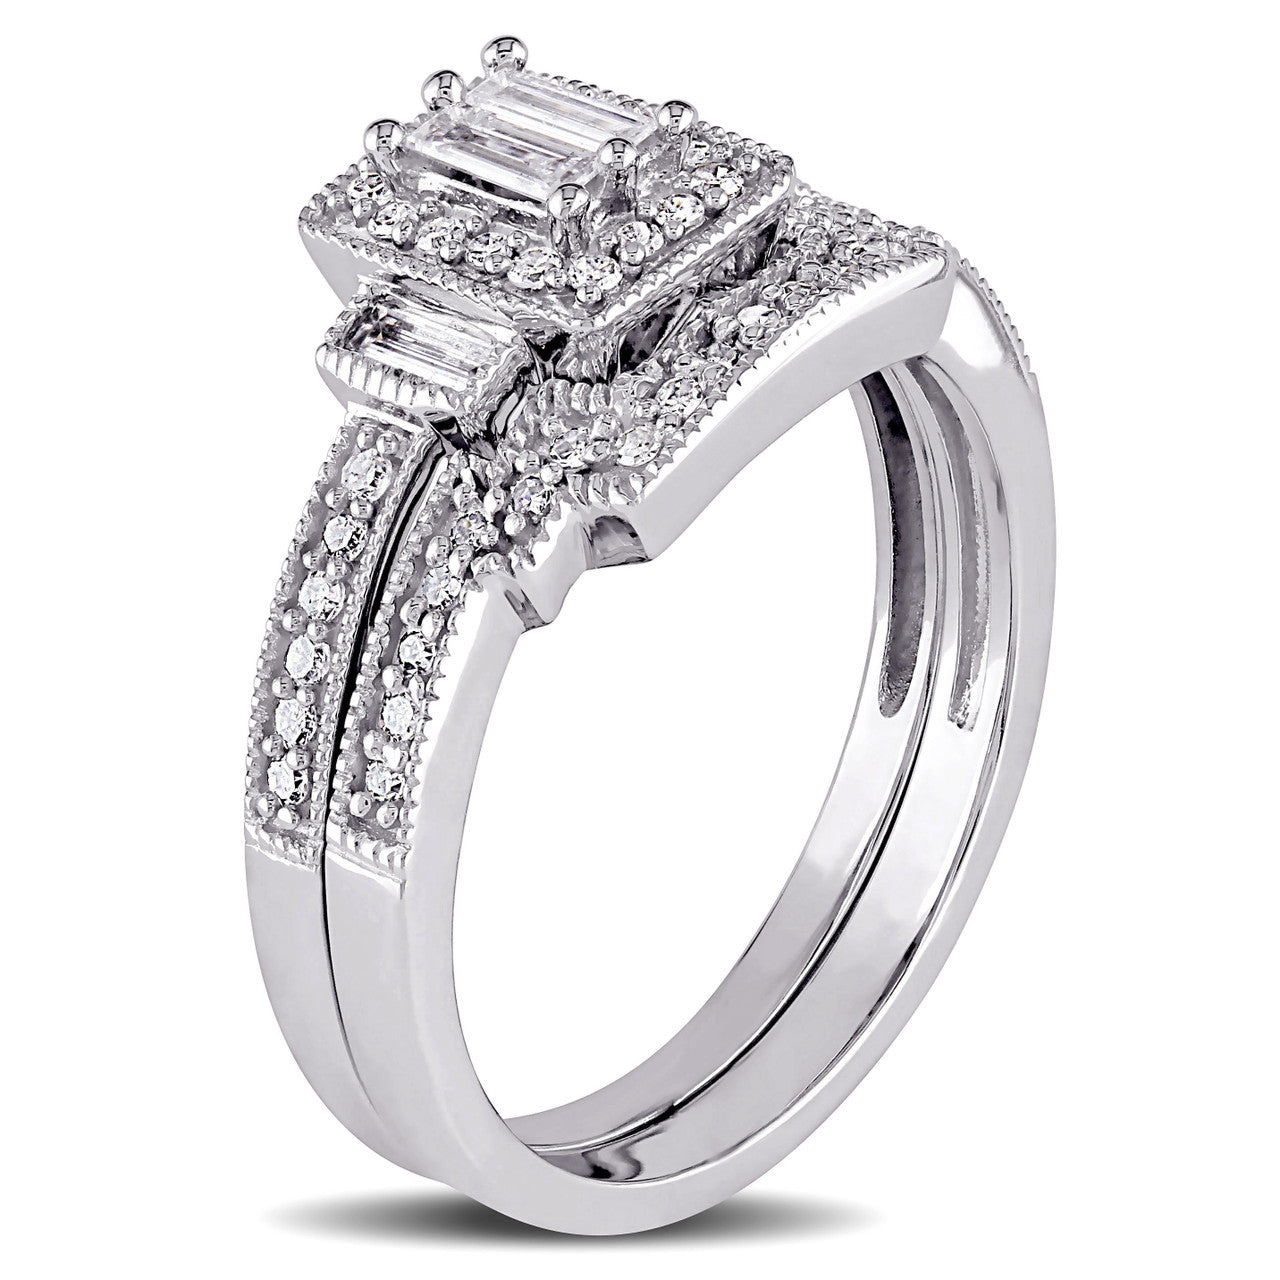 Ice Jewellery 2/5 CT Parallel Baguette and Round Diamonds TW Bridal Set Ring in 10k White Gold - 75000004429 | Ice Jewellery Australia